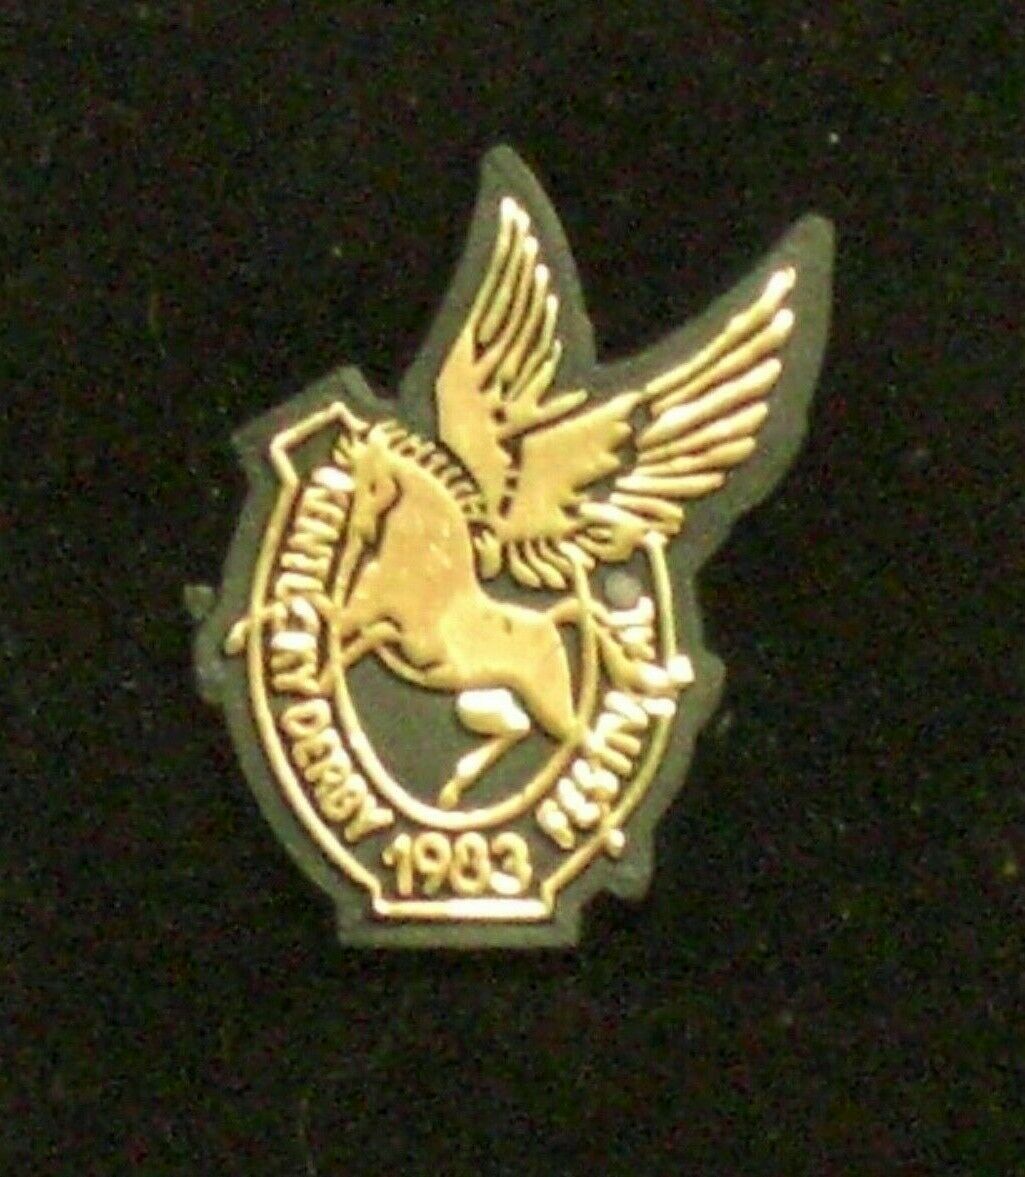 1983 Kentucky Derby Festival "Pegasus" Pin in MINT Condition Horse